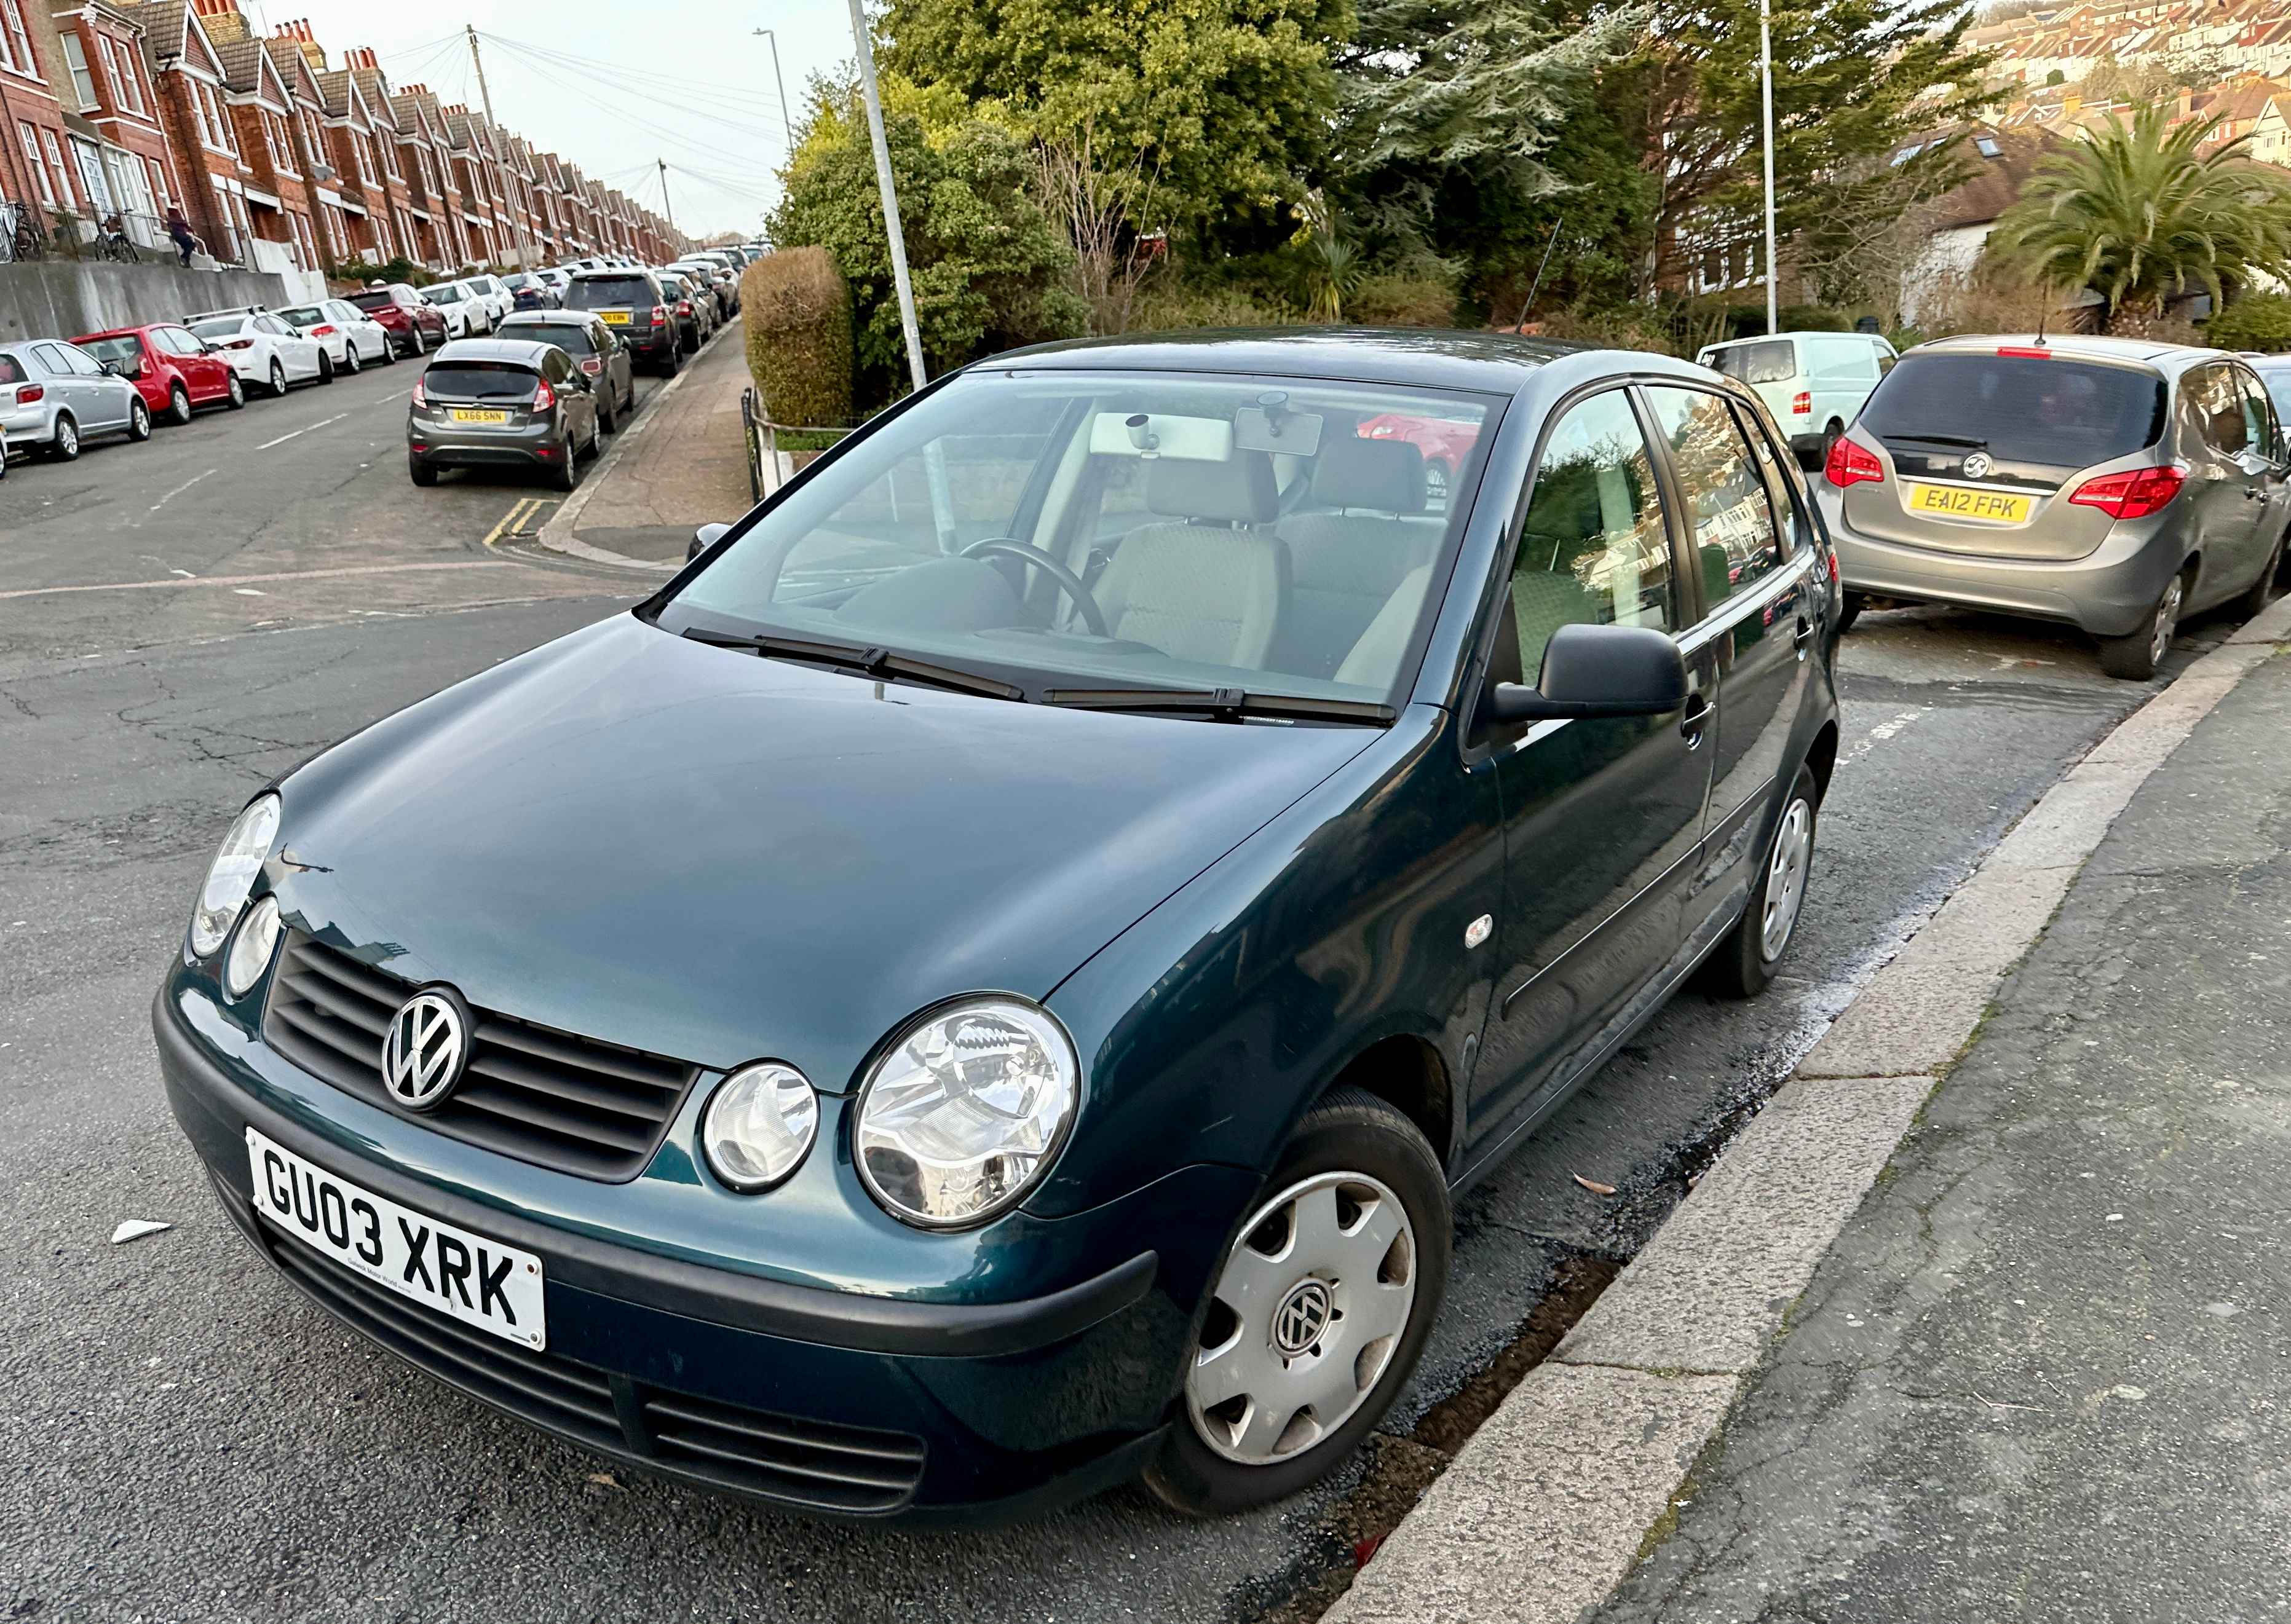 Photograph of GU03 XRK - a Green Volkswagen Polo parked in Hollingdean by a non-resident. The seventh of eight photographs supplied by the residents of Hollingdean.